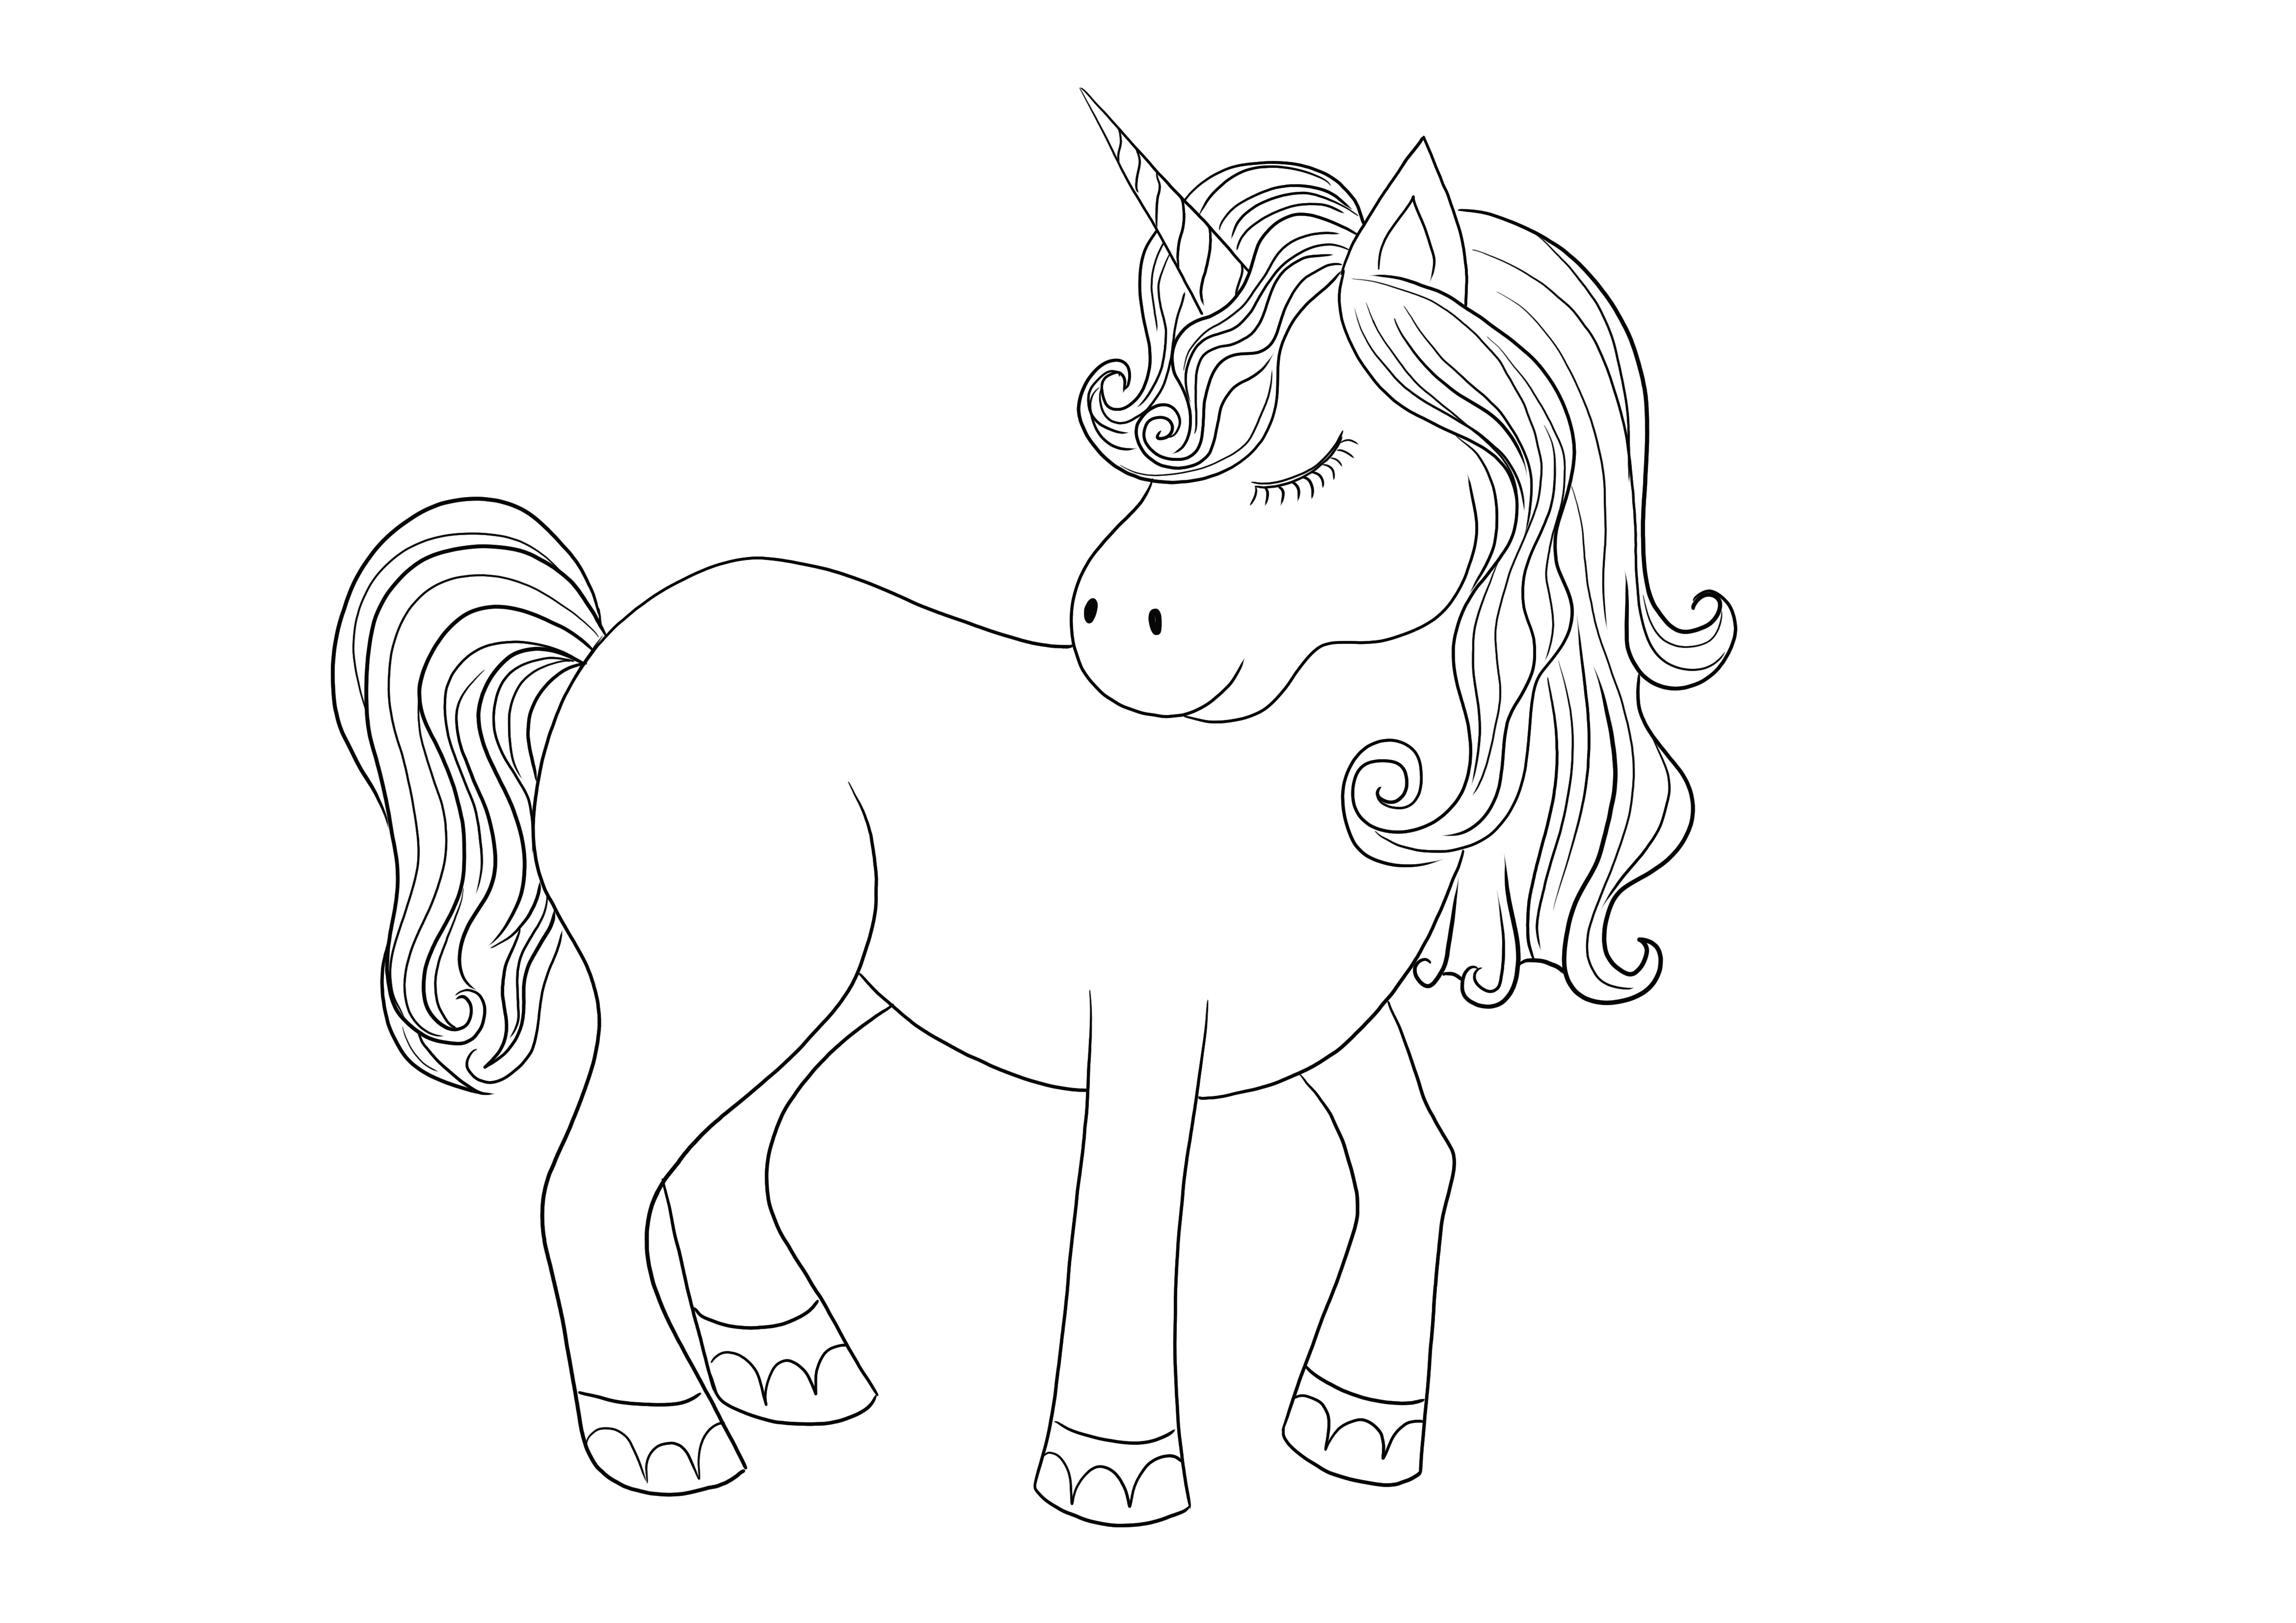 Unicorn coloring and free printing or downloading page